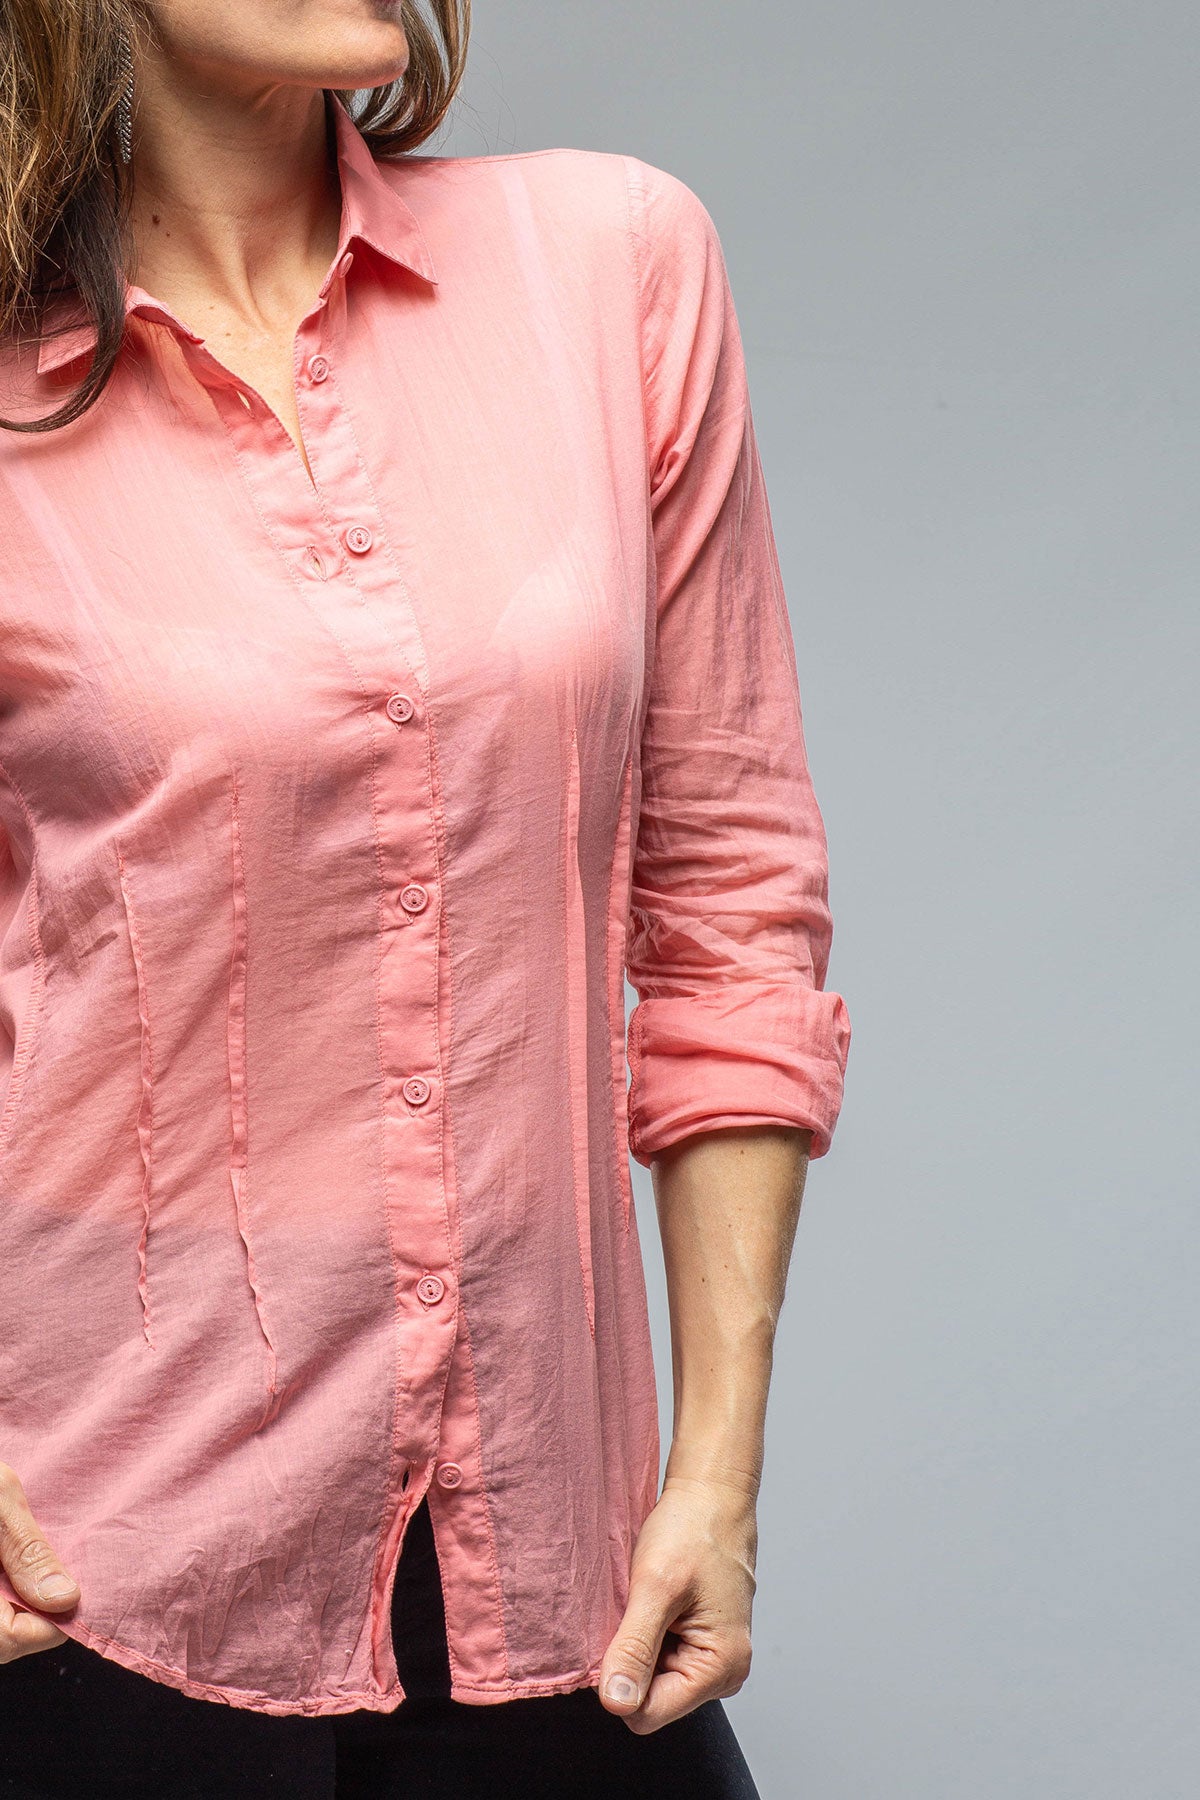 Dessina Darted Shirt In Coral | Ladies - Blouses | European Culture